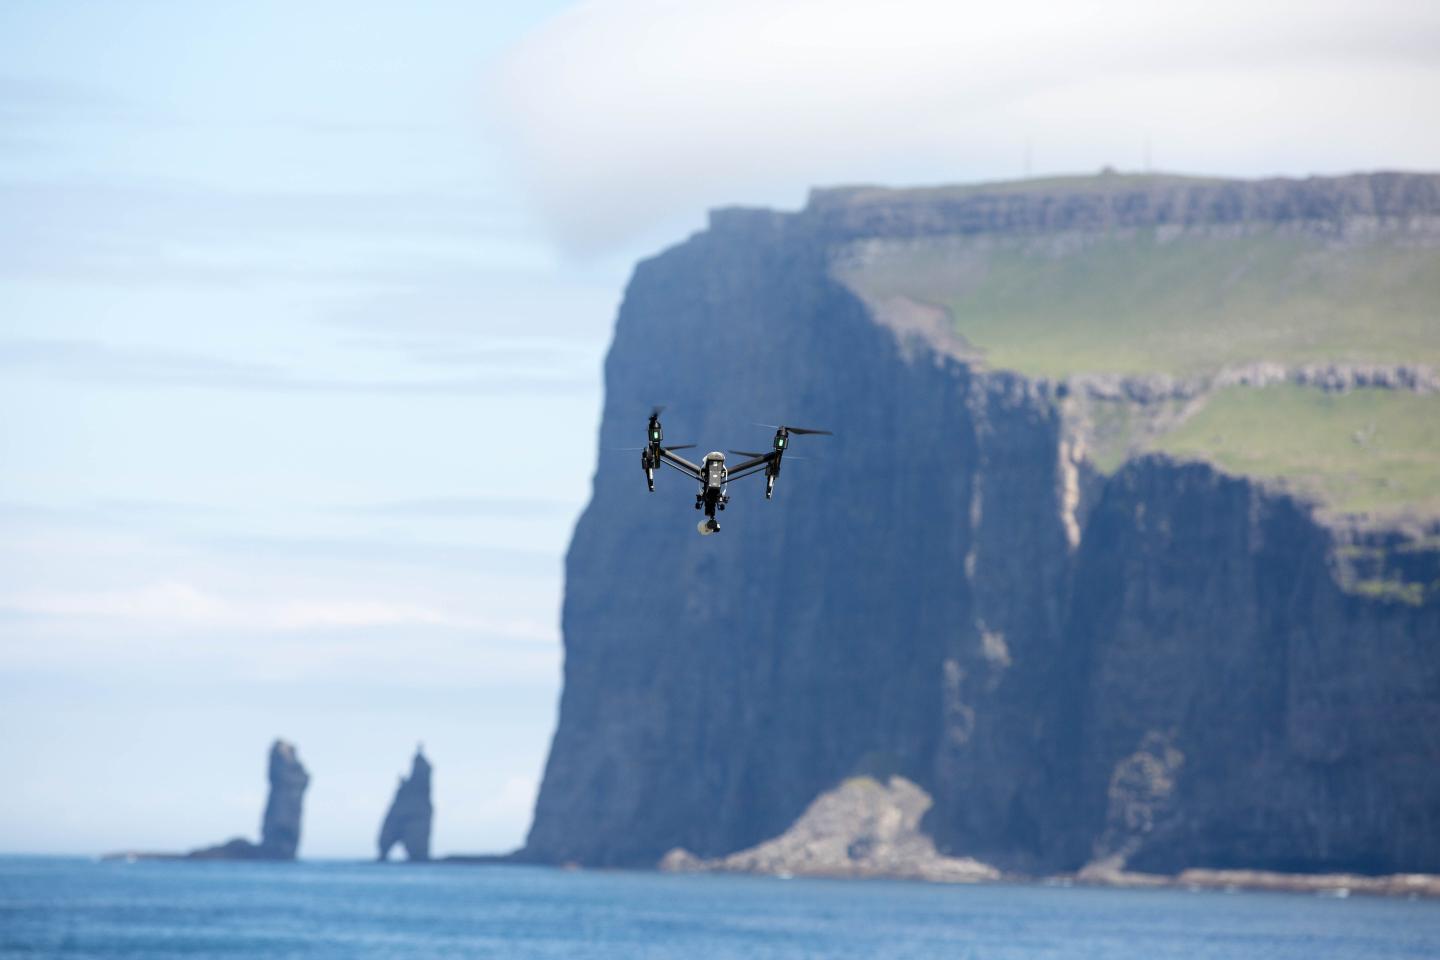 A Drone in Action